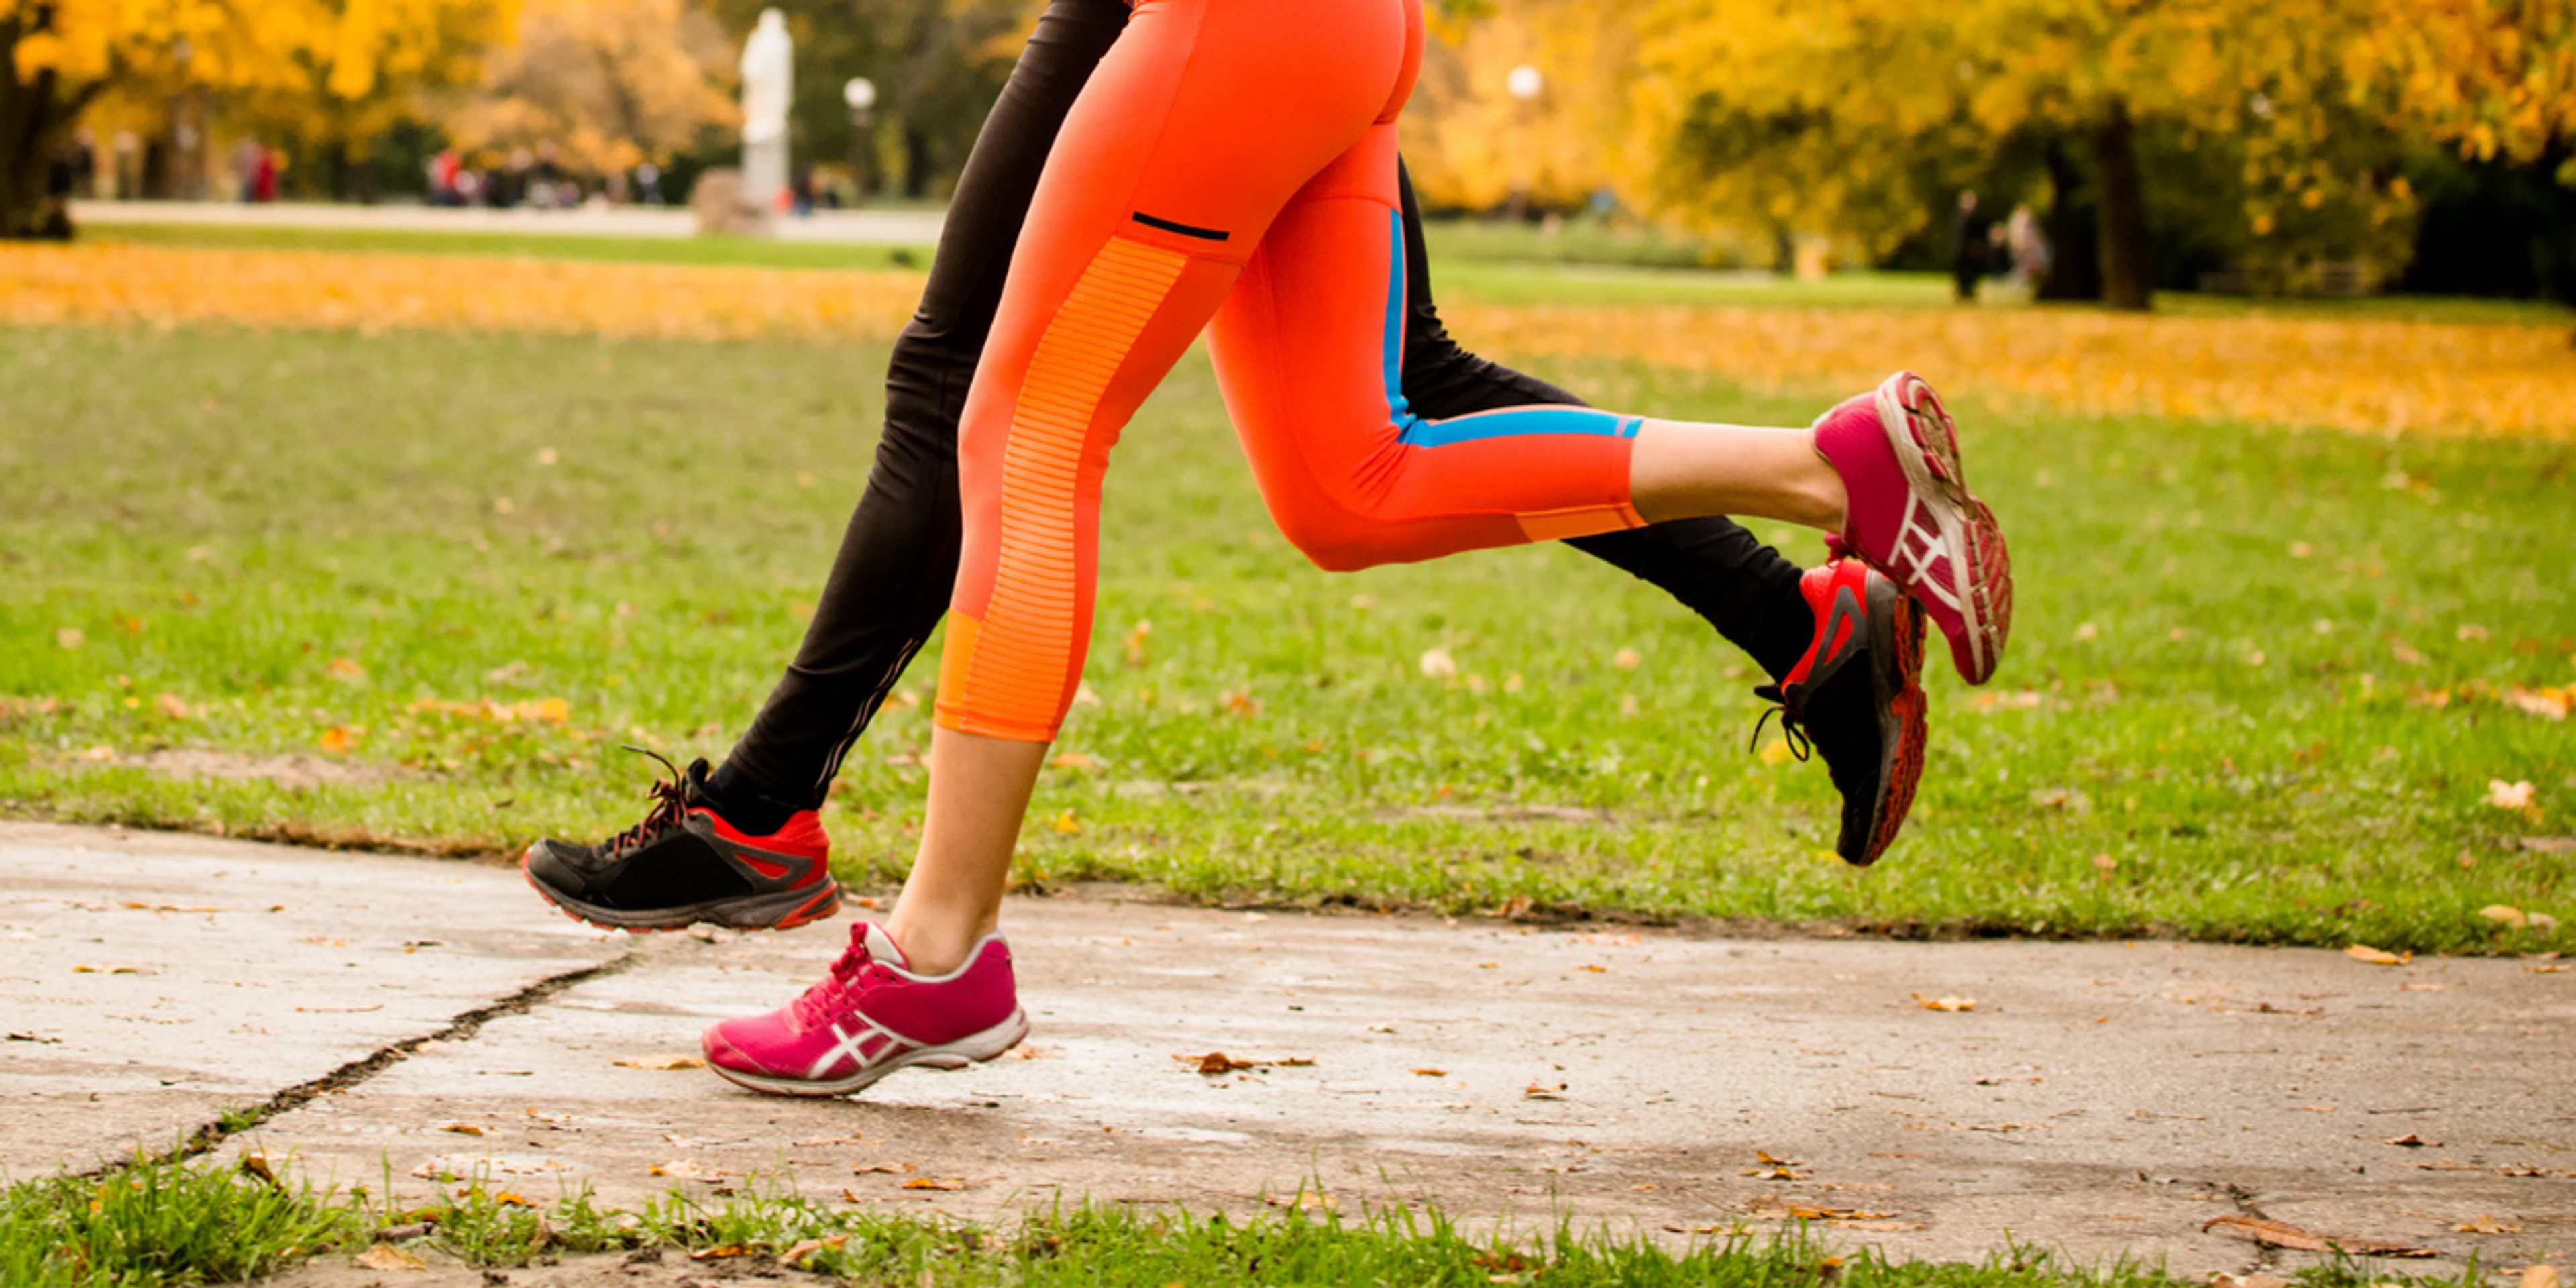 Adjusting your running form may help reduce your back pain.